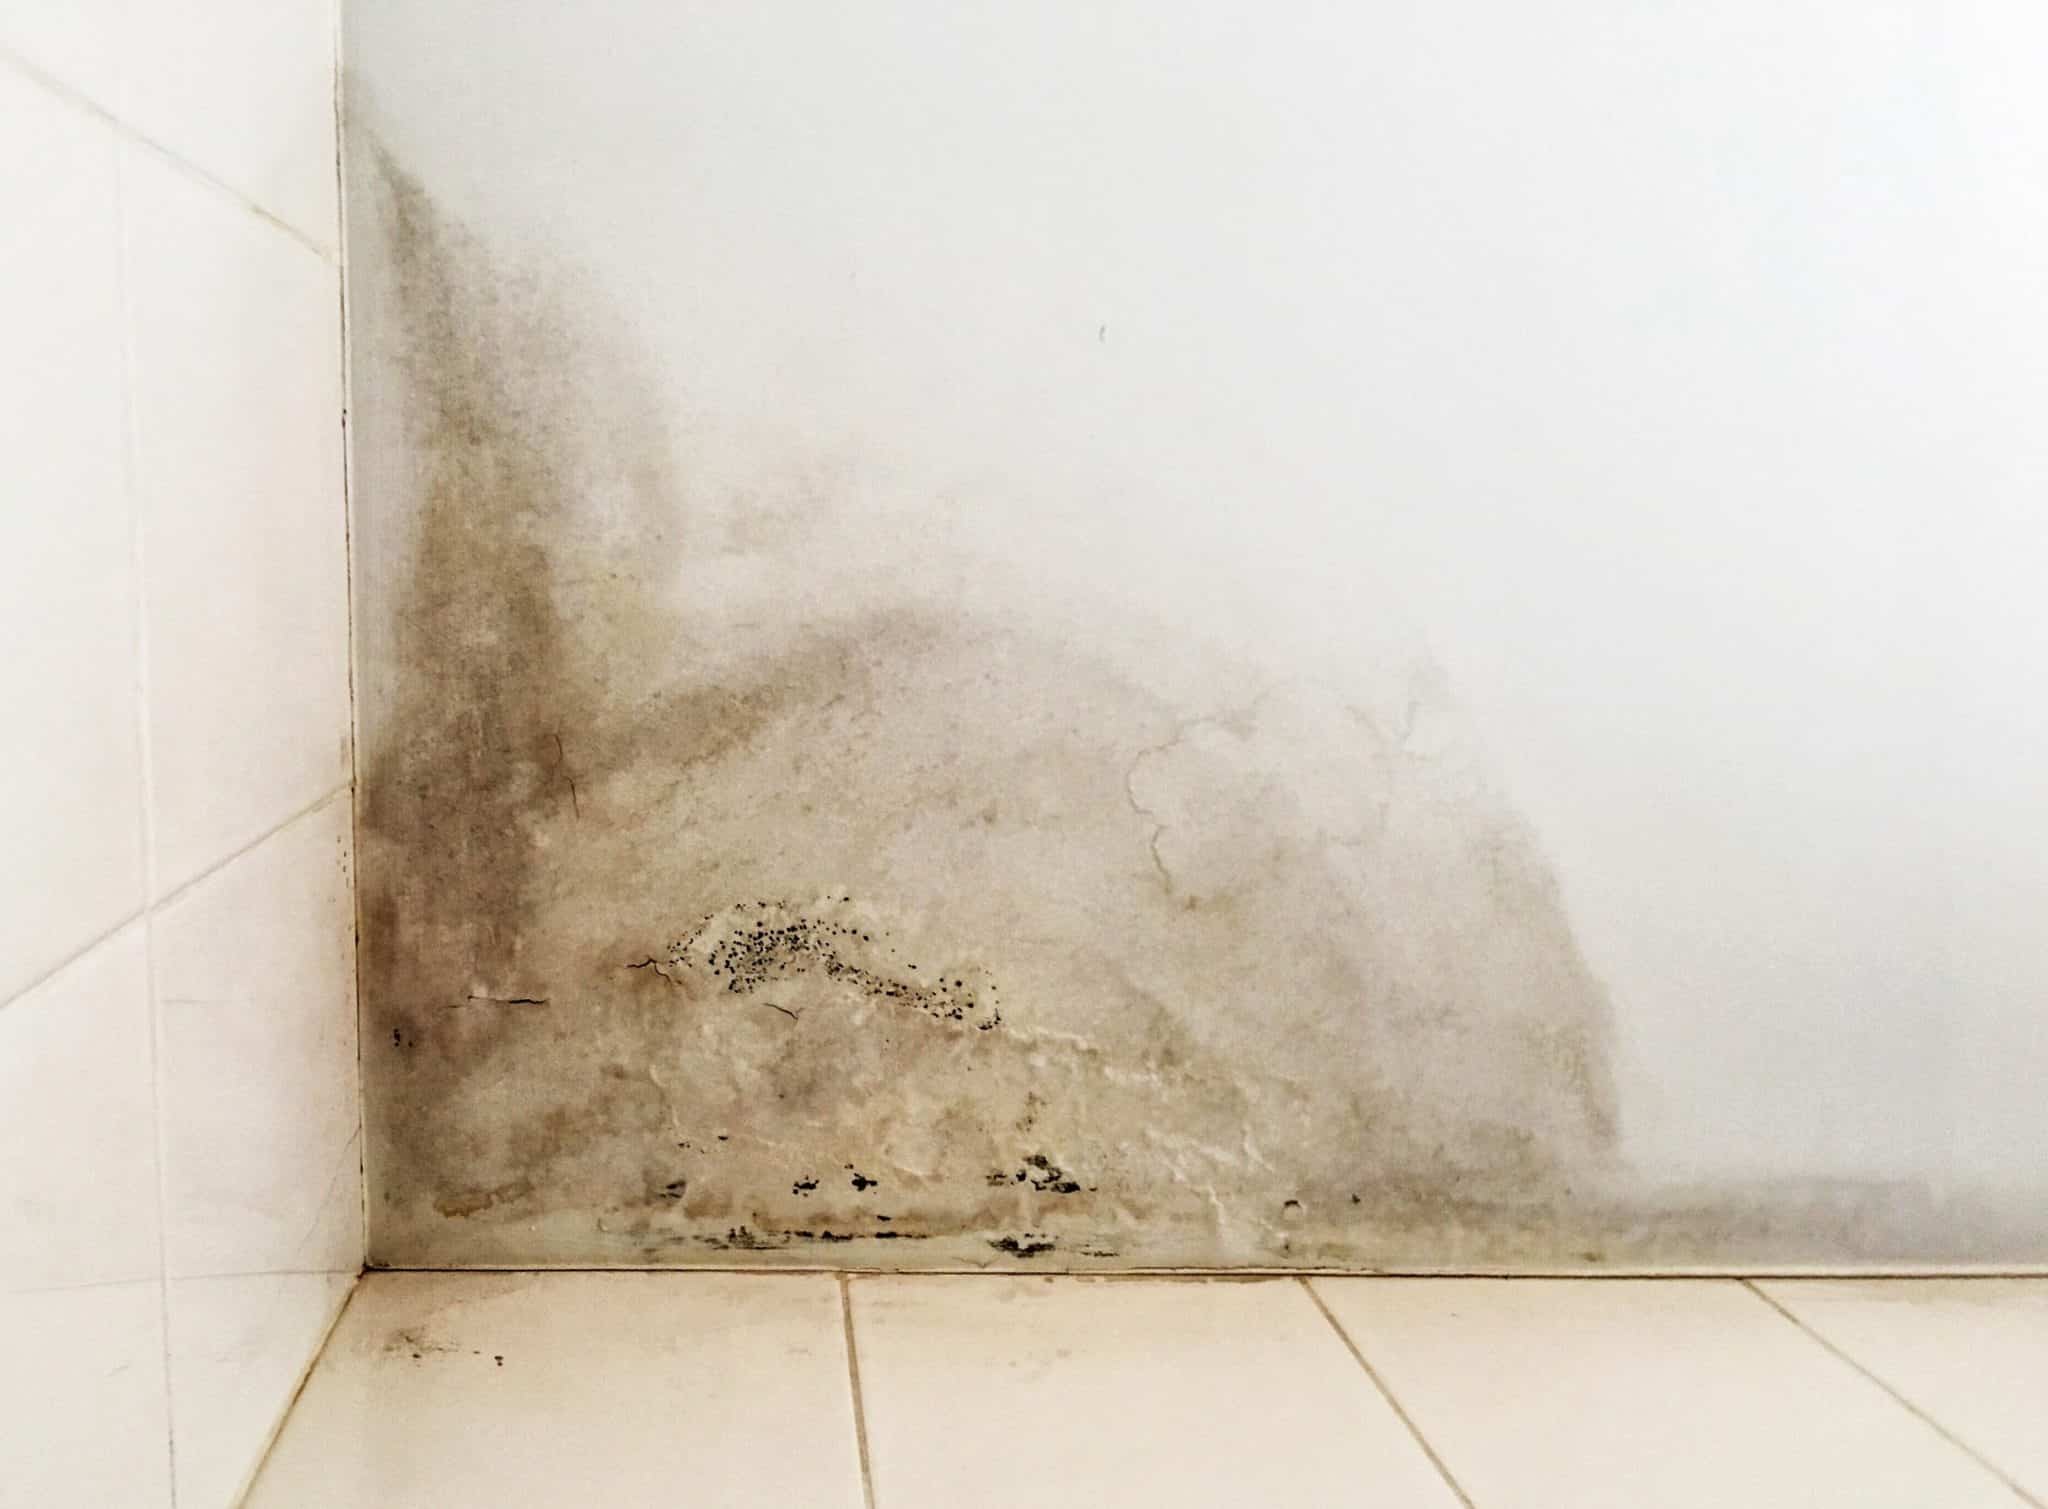 Mould can affect your health